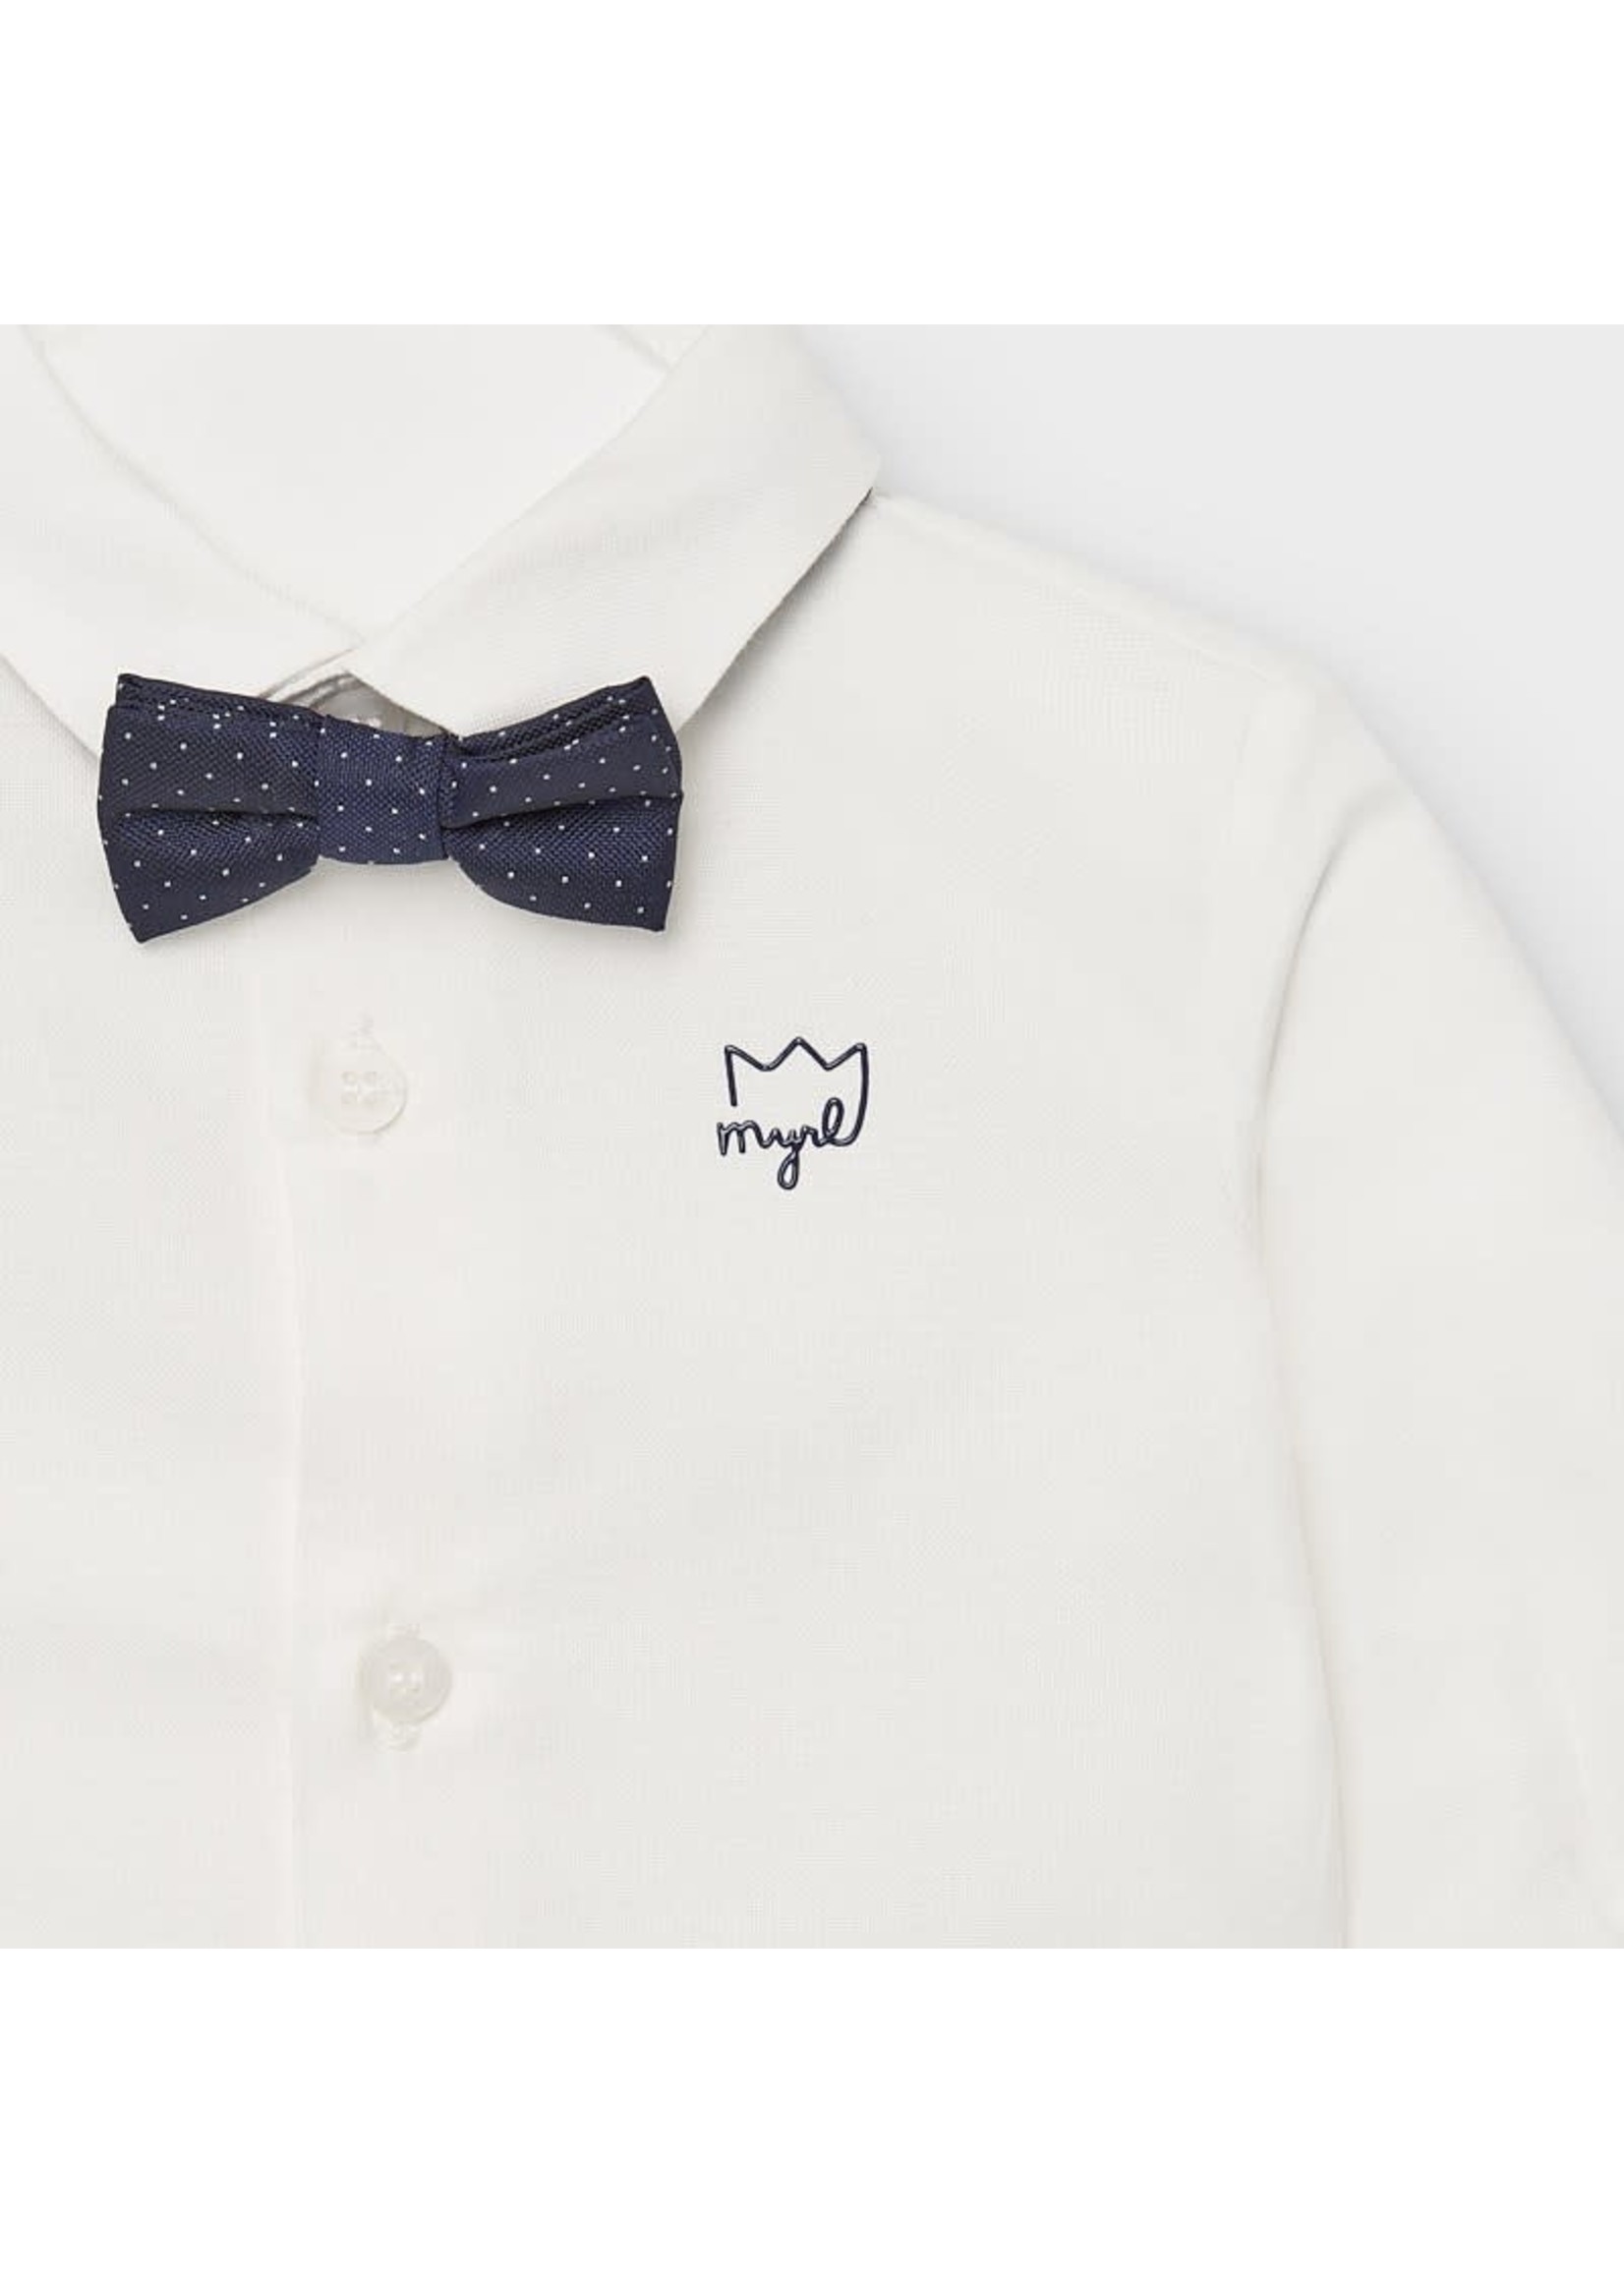 Mayoral Mayoral L/s shirt and bowtie Natural - 20 02119